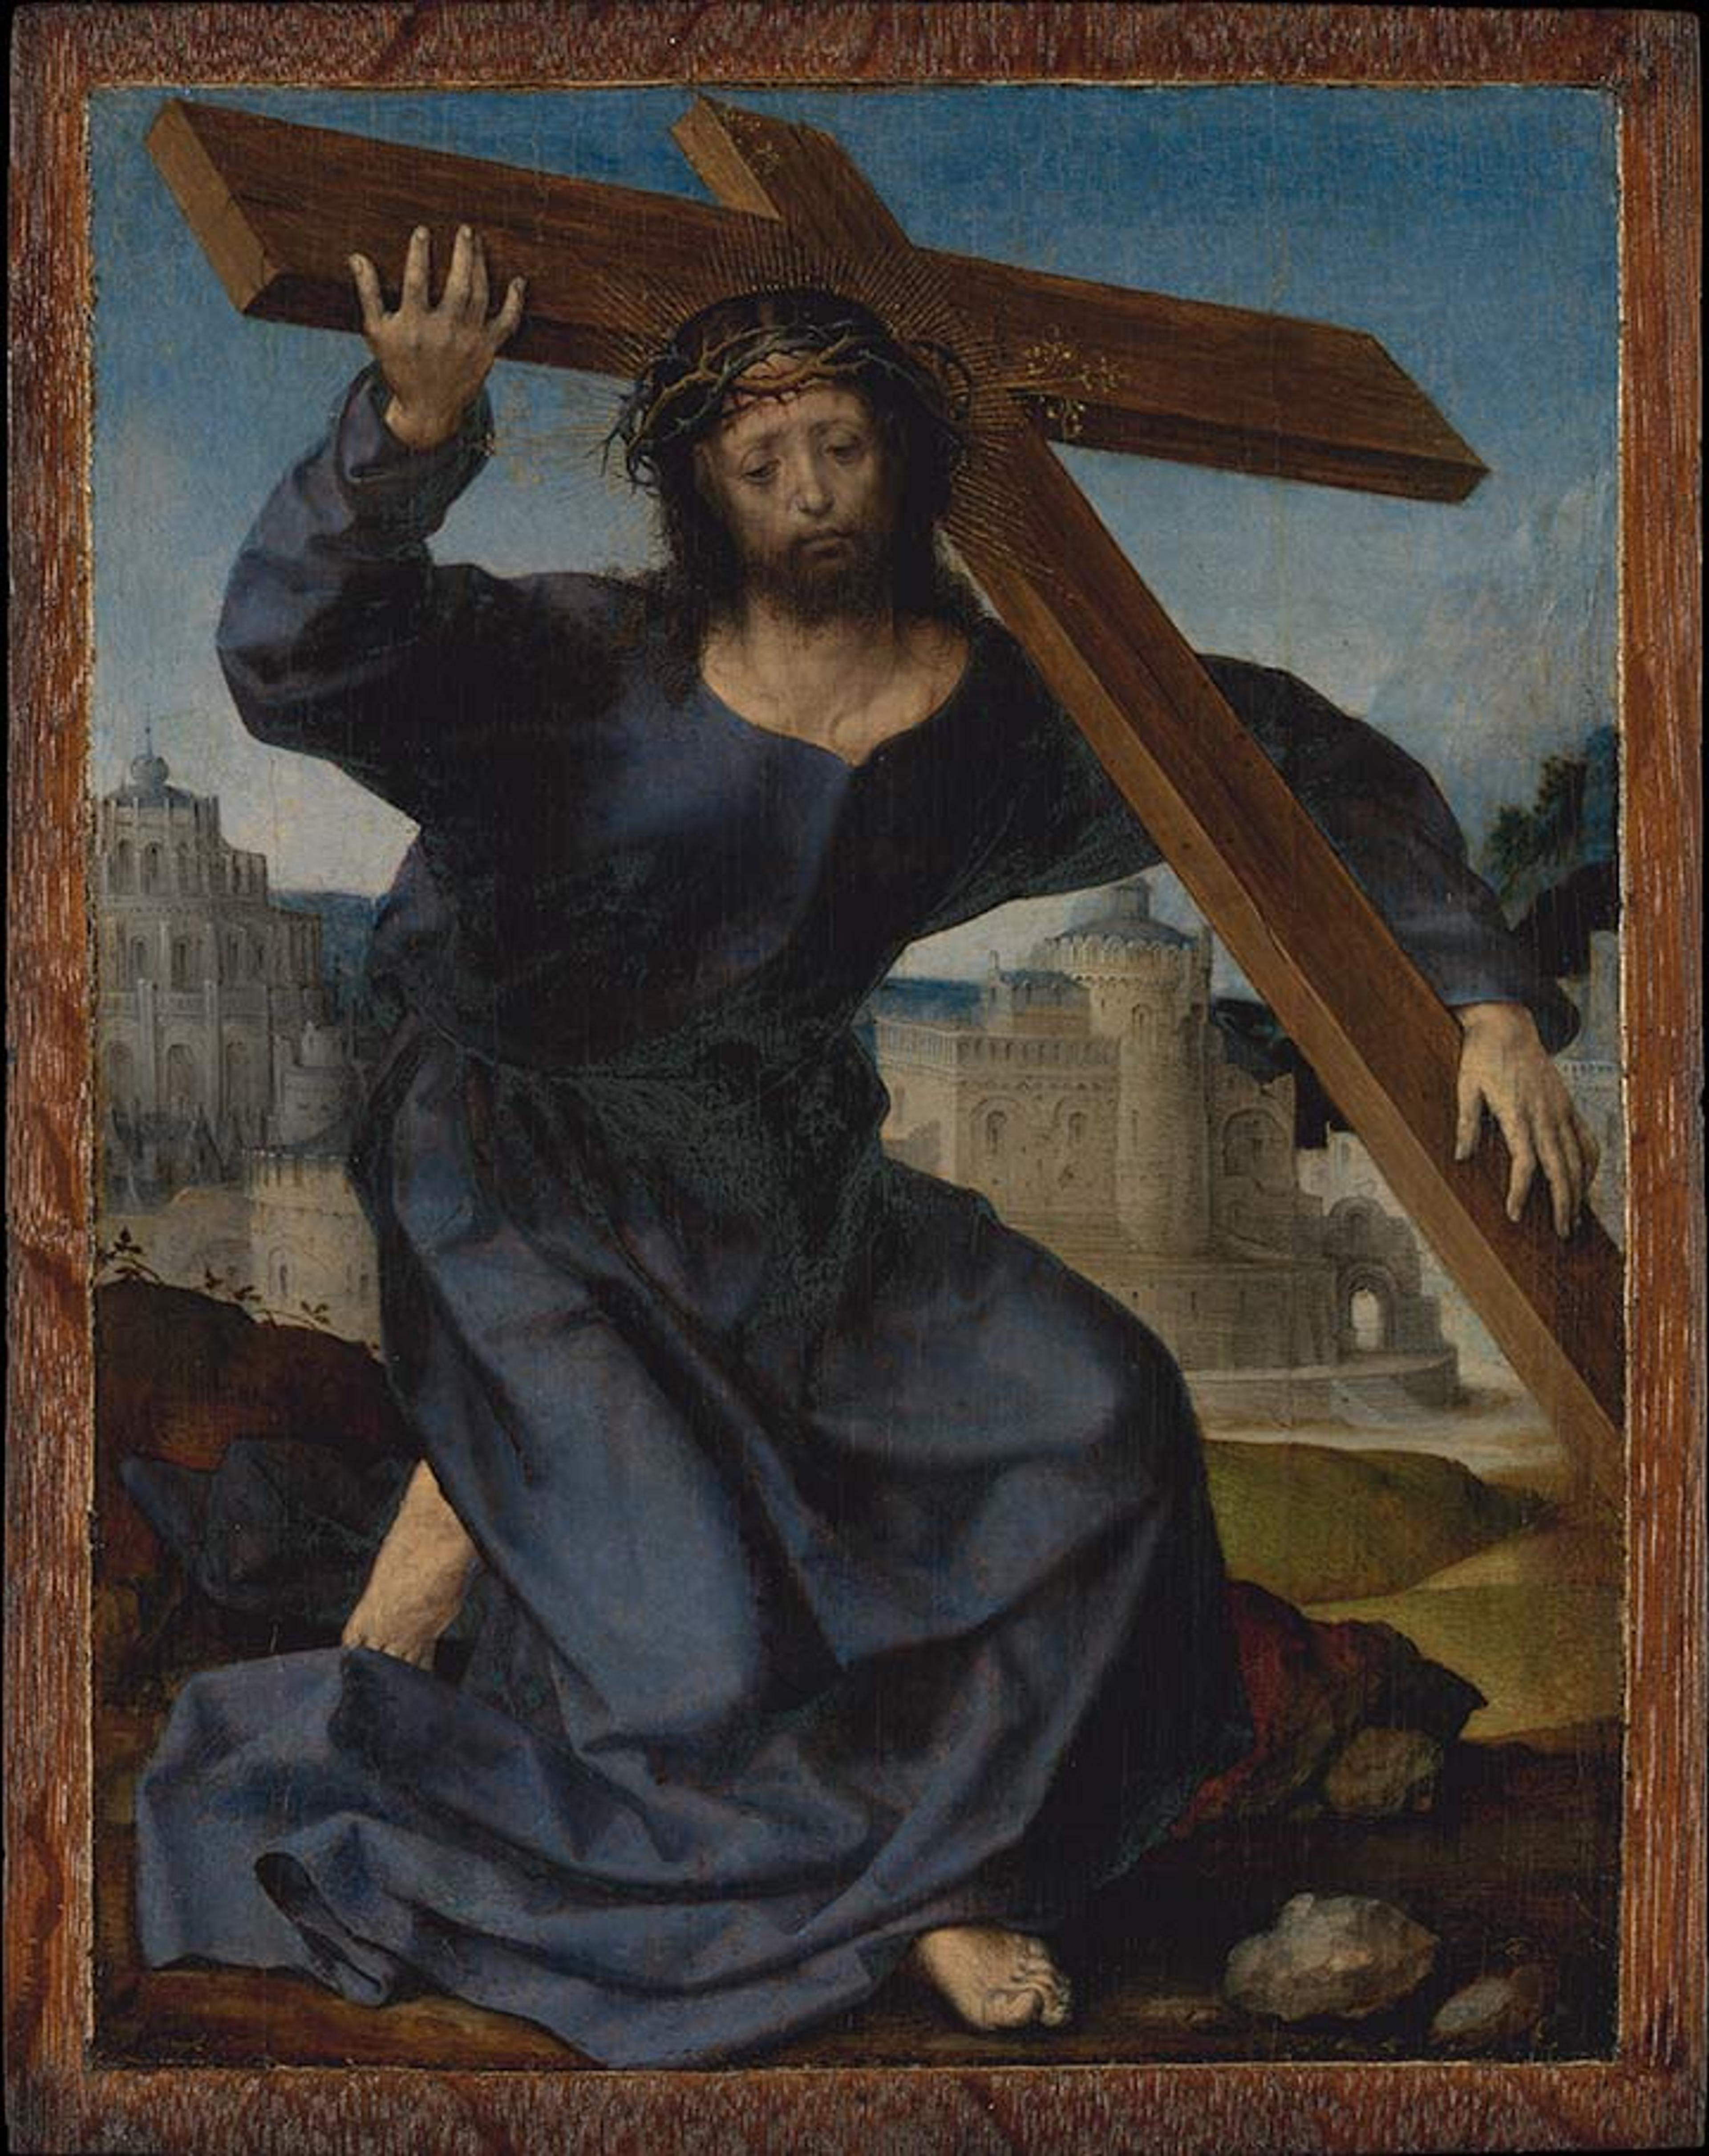 Christ wearing a dark blue robe and carrying the cross